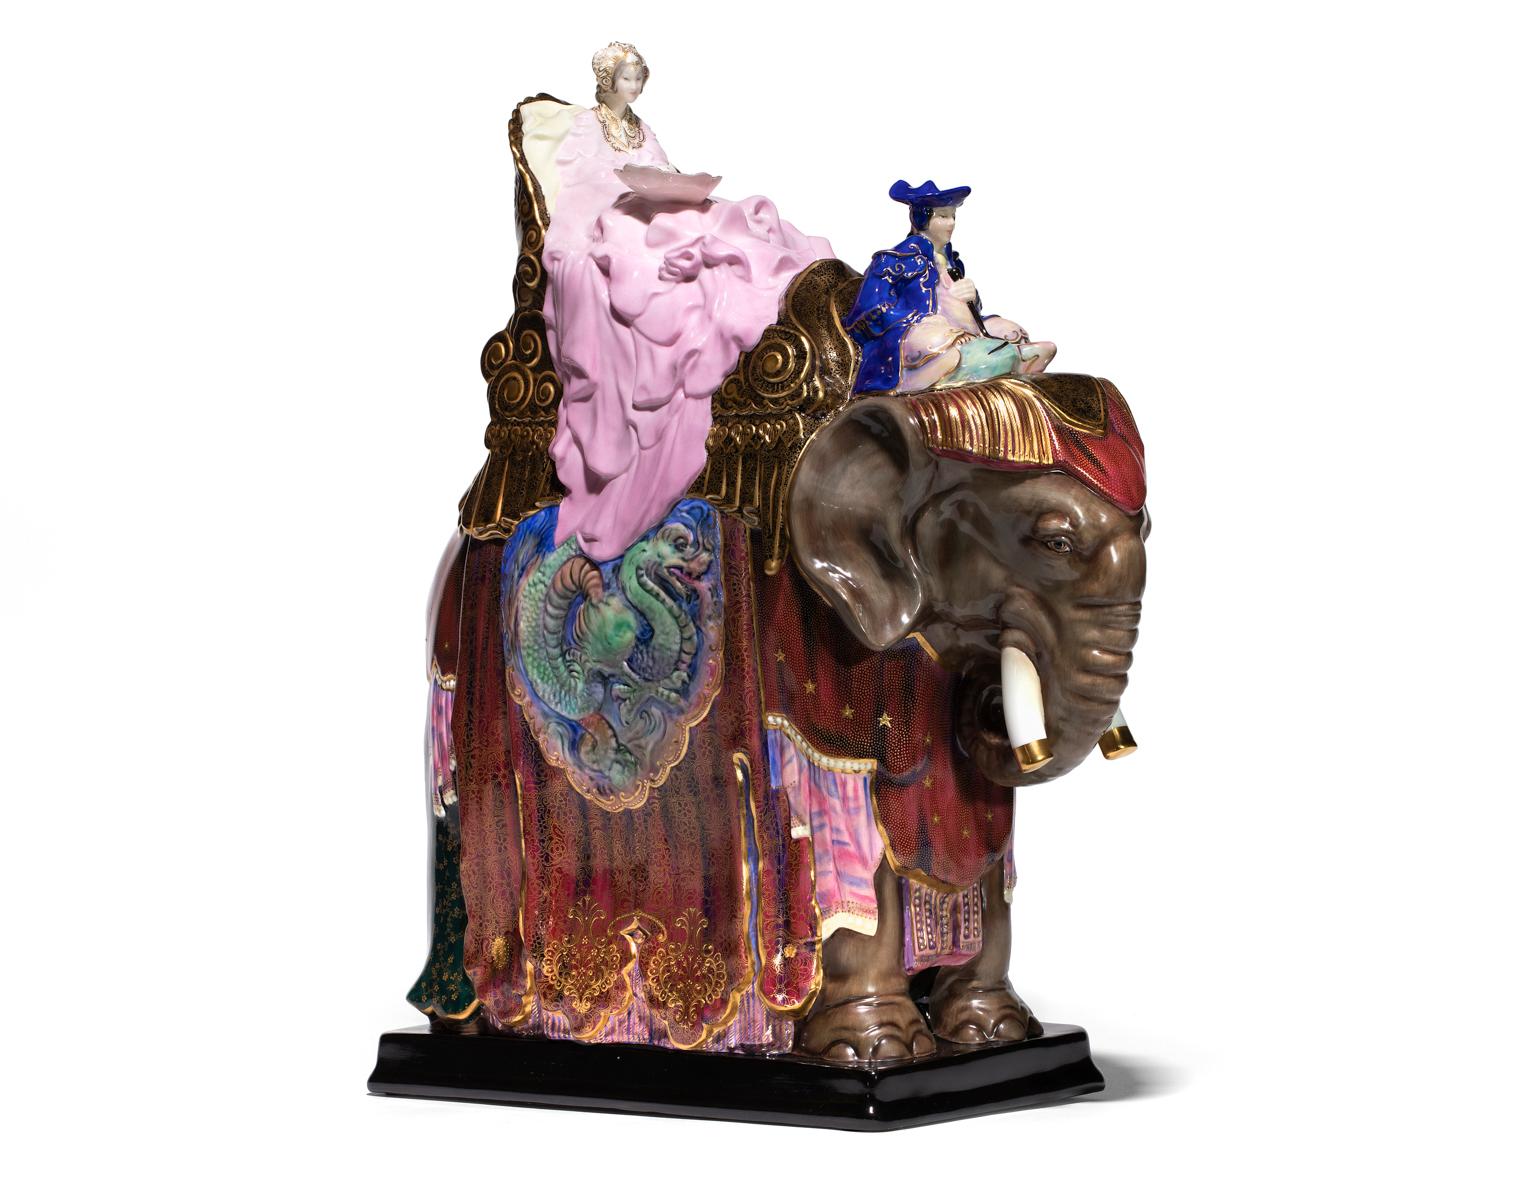 Princess Badoura was the most prestigious and expensive figure ever made by Royal Doulton. It was made to order for wealthy clients for nearly 50 years and a special color version was devised for Harrods of London. In addition, it has 22 carat gold